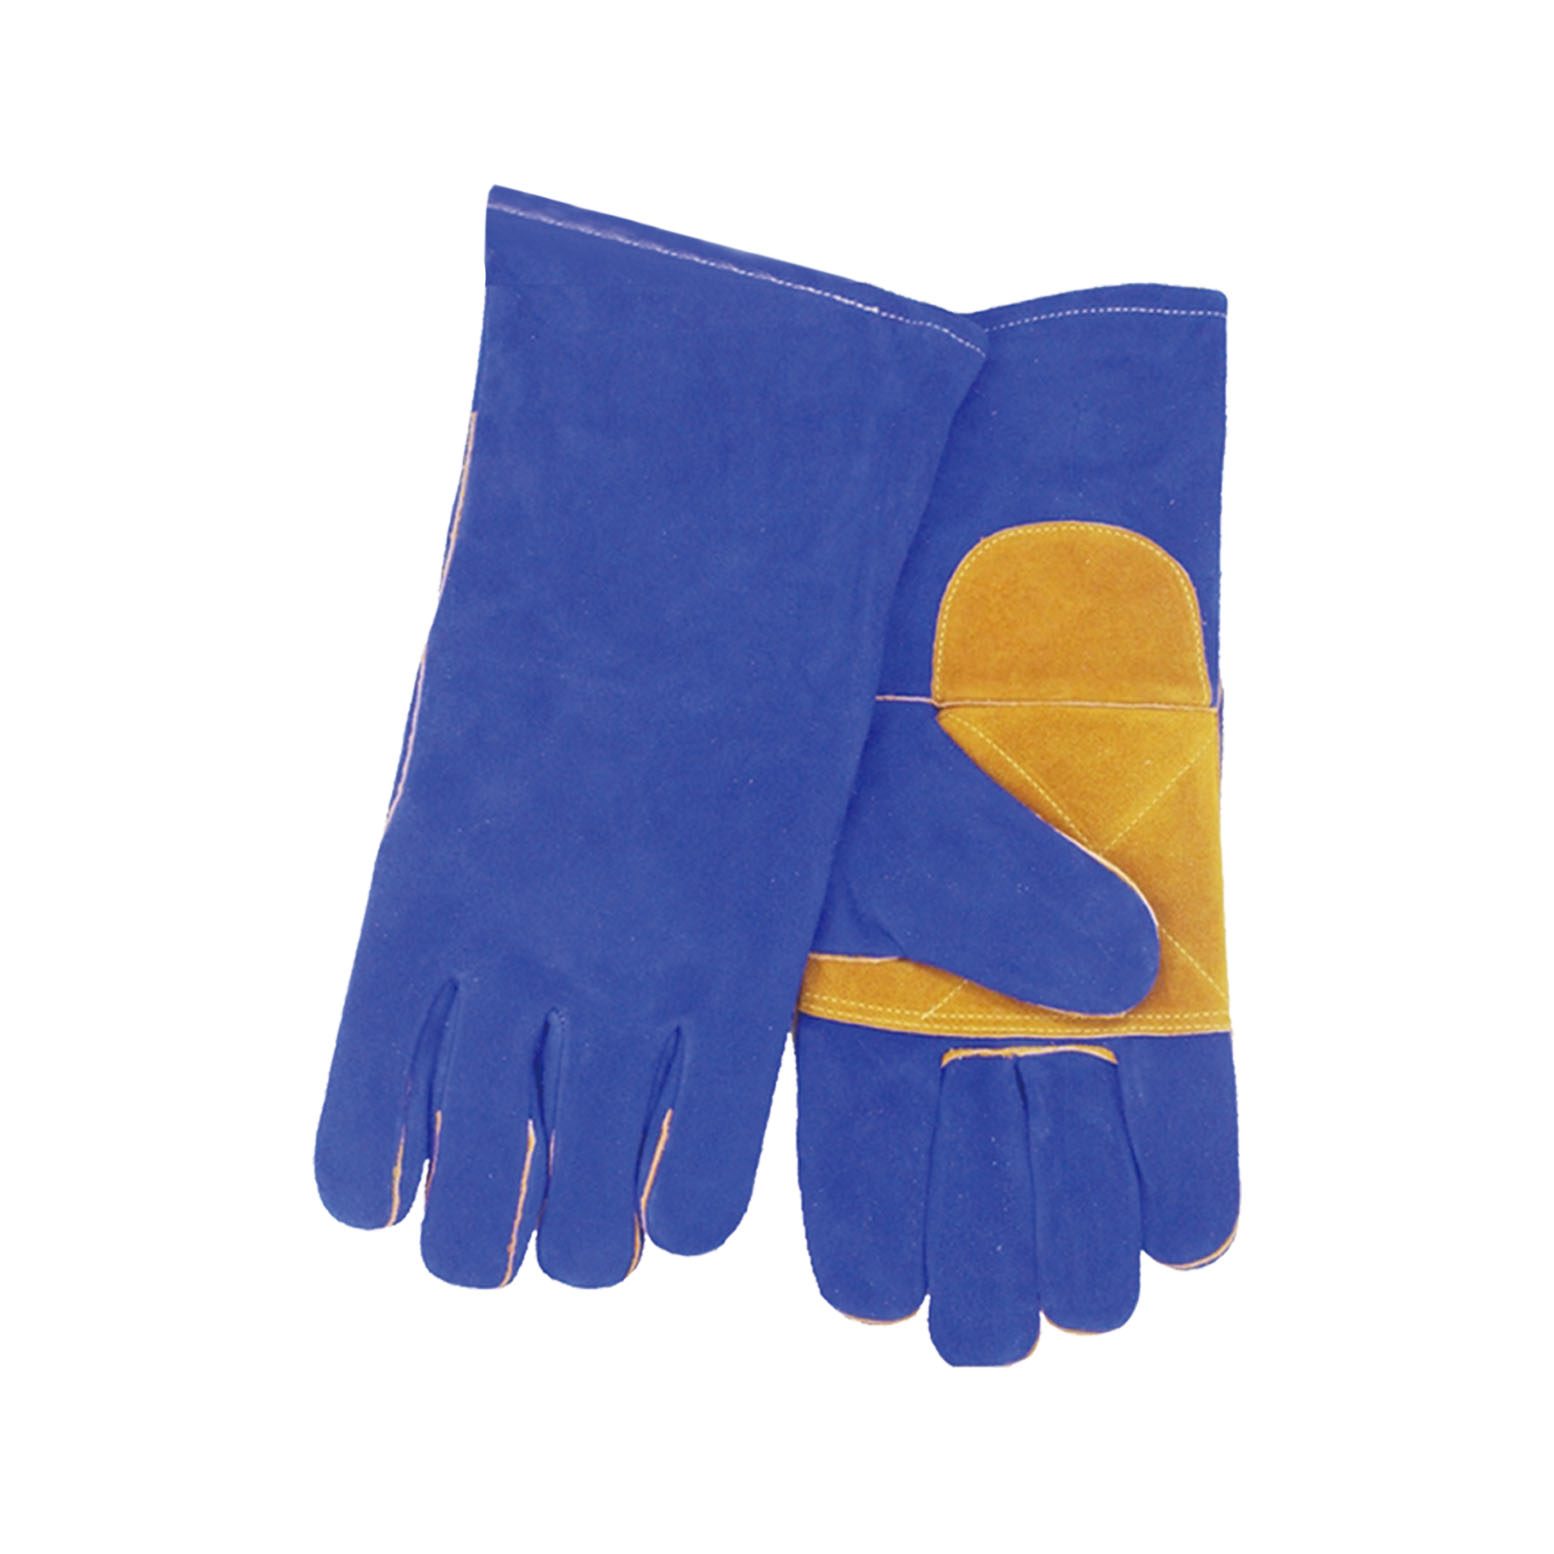 Get Star Weld Double-layer leather welding gloves